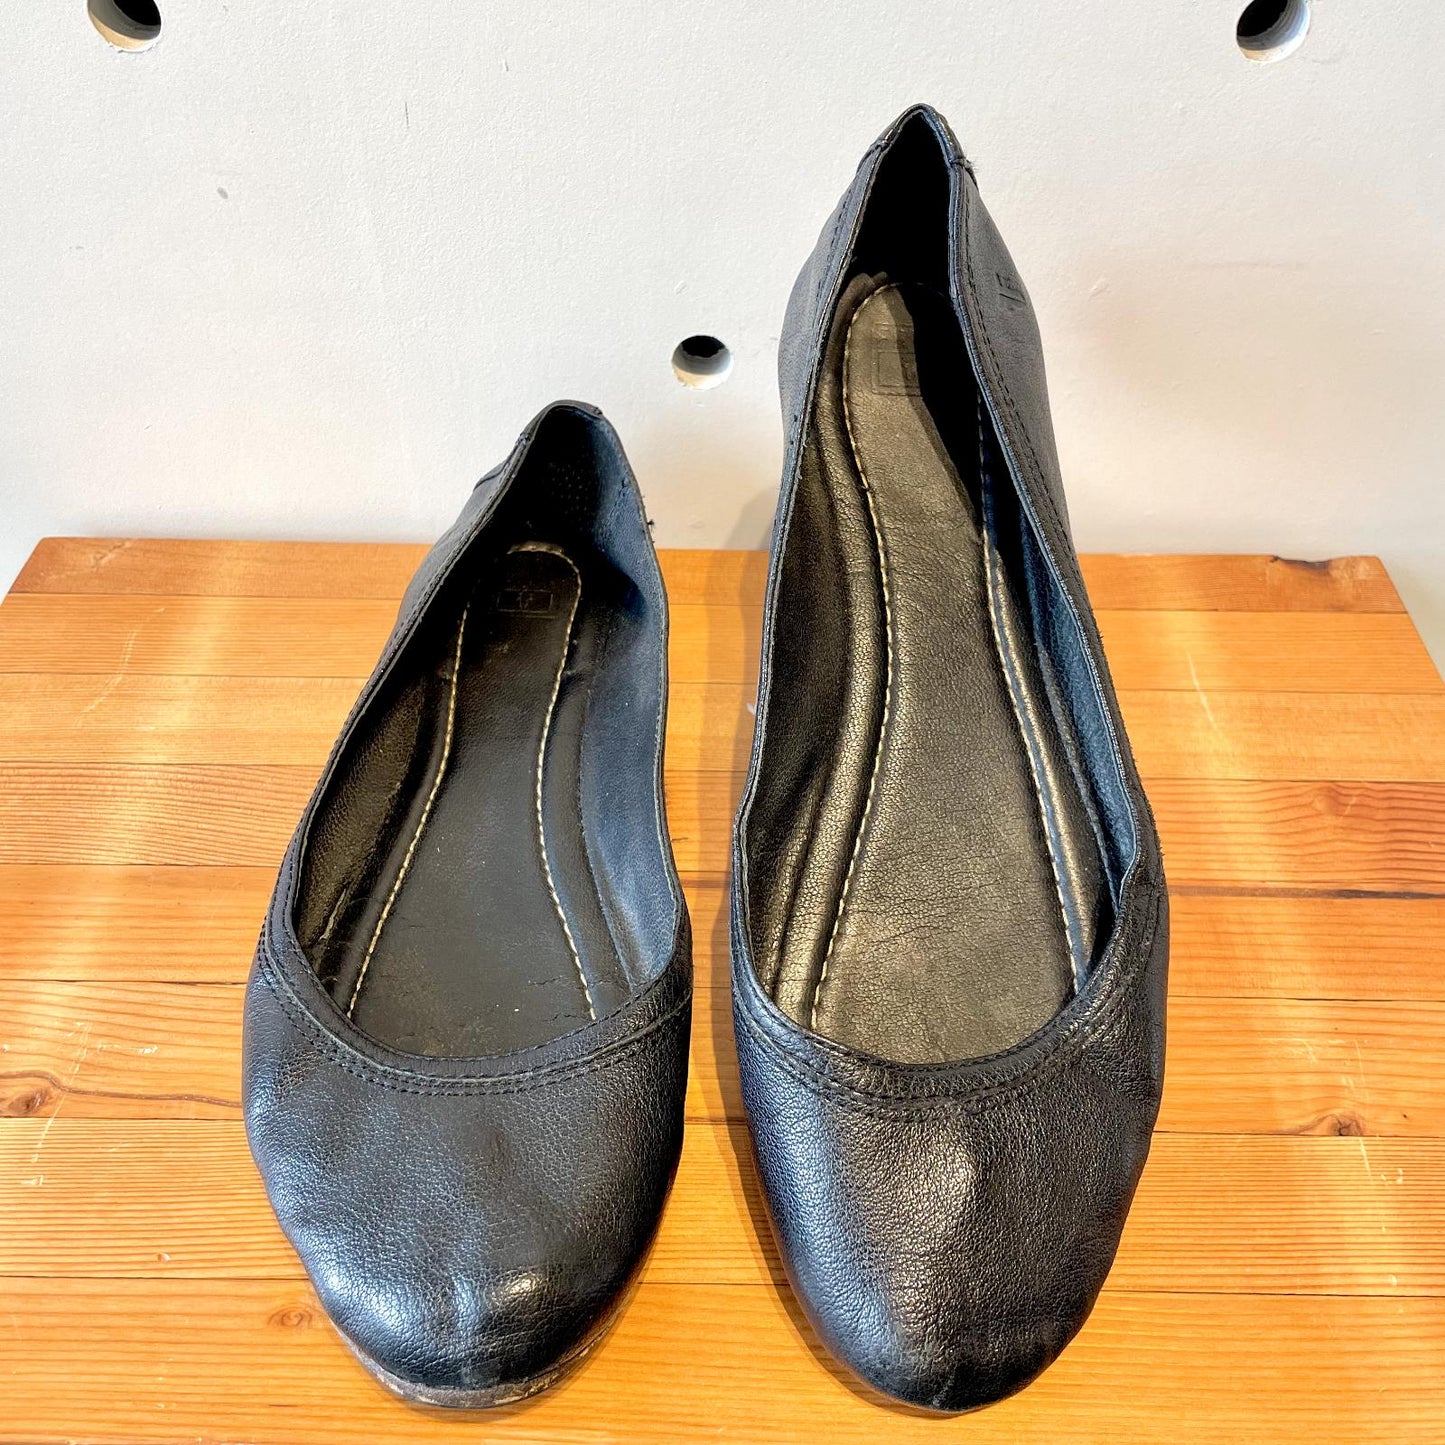 11 - Frye Black Leather Round Toe Carson Ballet Flats Shoes 0210RN